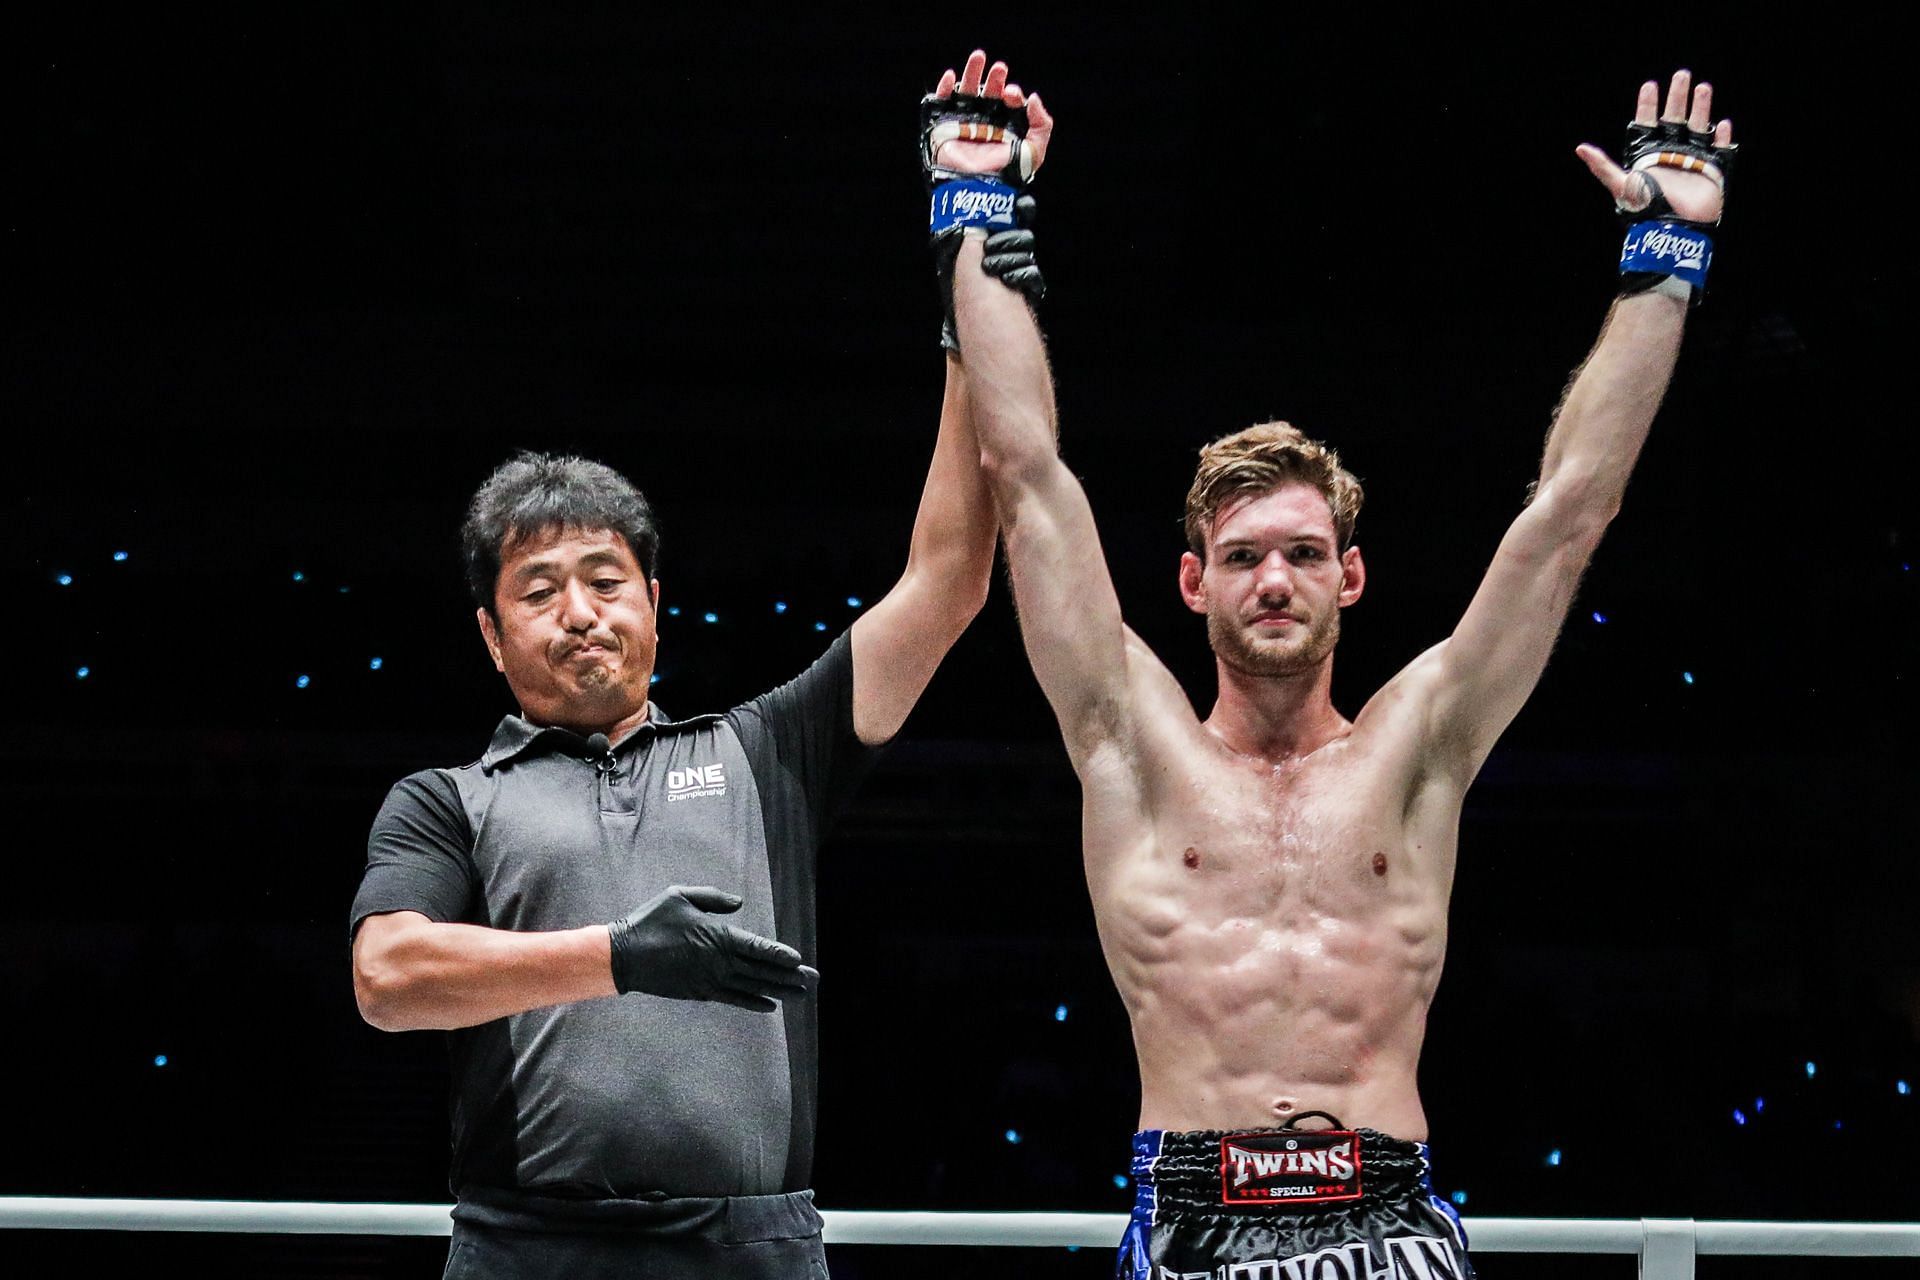 Liam Nolan (right) hopes to extend his winning streak in ONE. [Photo: ONE Championship]